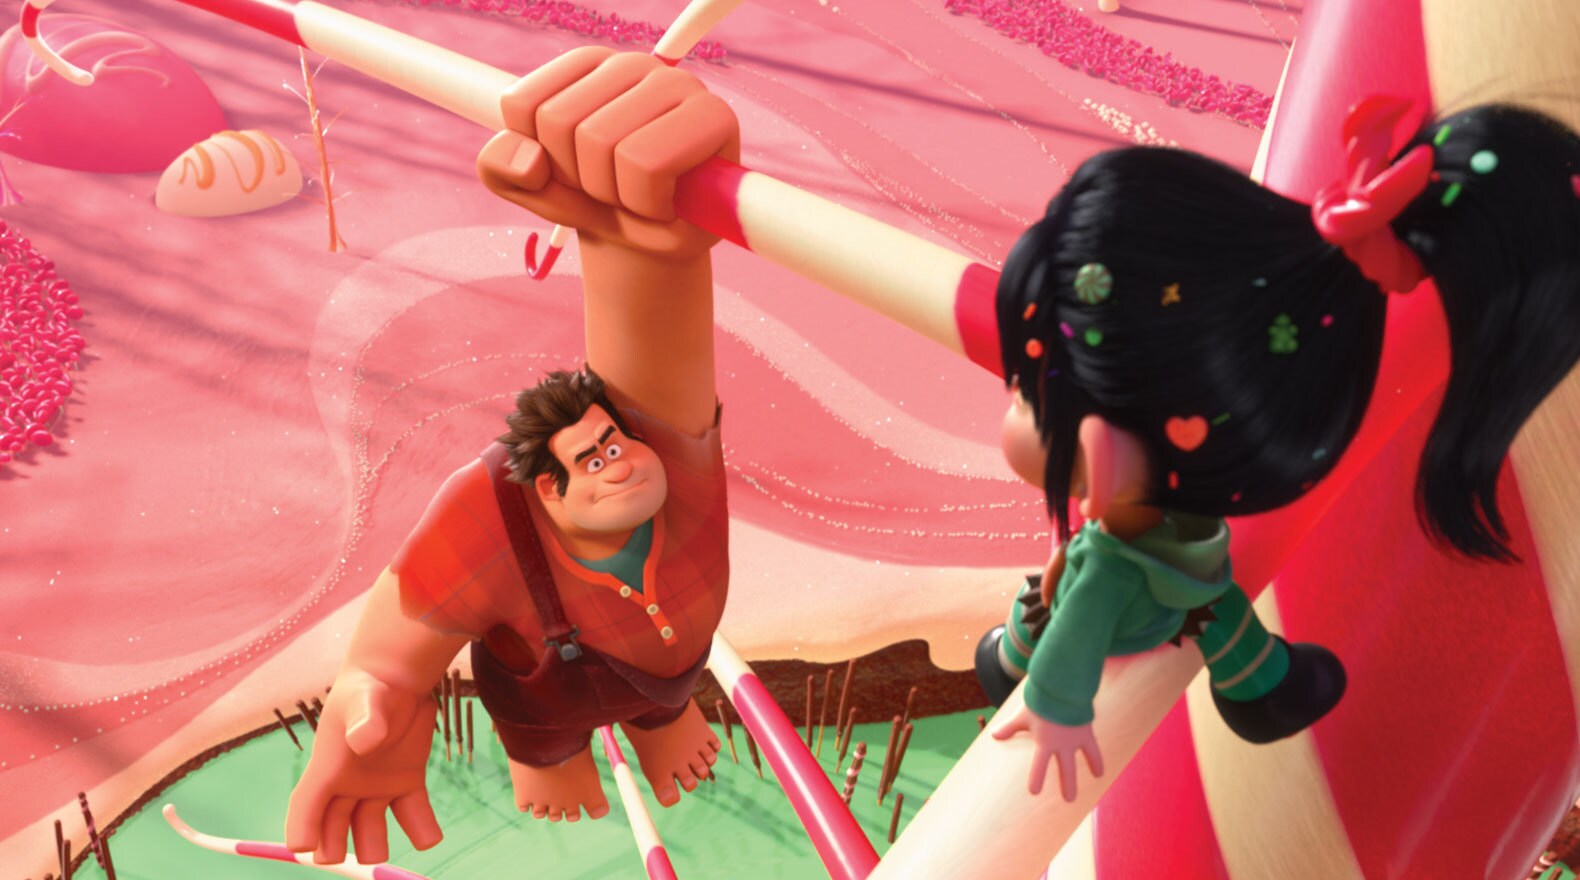 Ralph gets to know his new friend Vanellope.